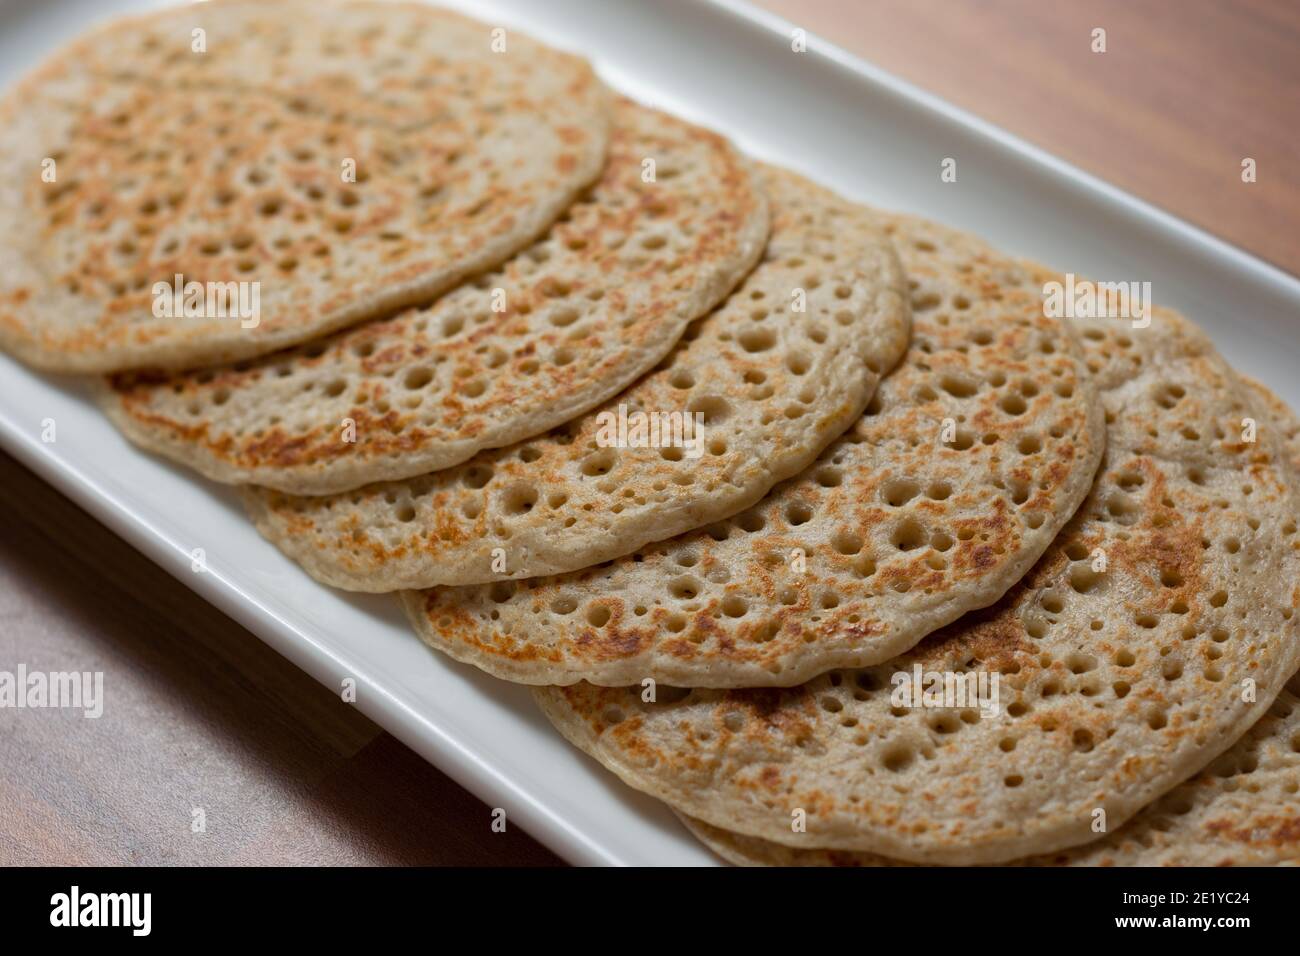 Derbyshire oatcakes viewed from the side on a white platter Stock Photo